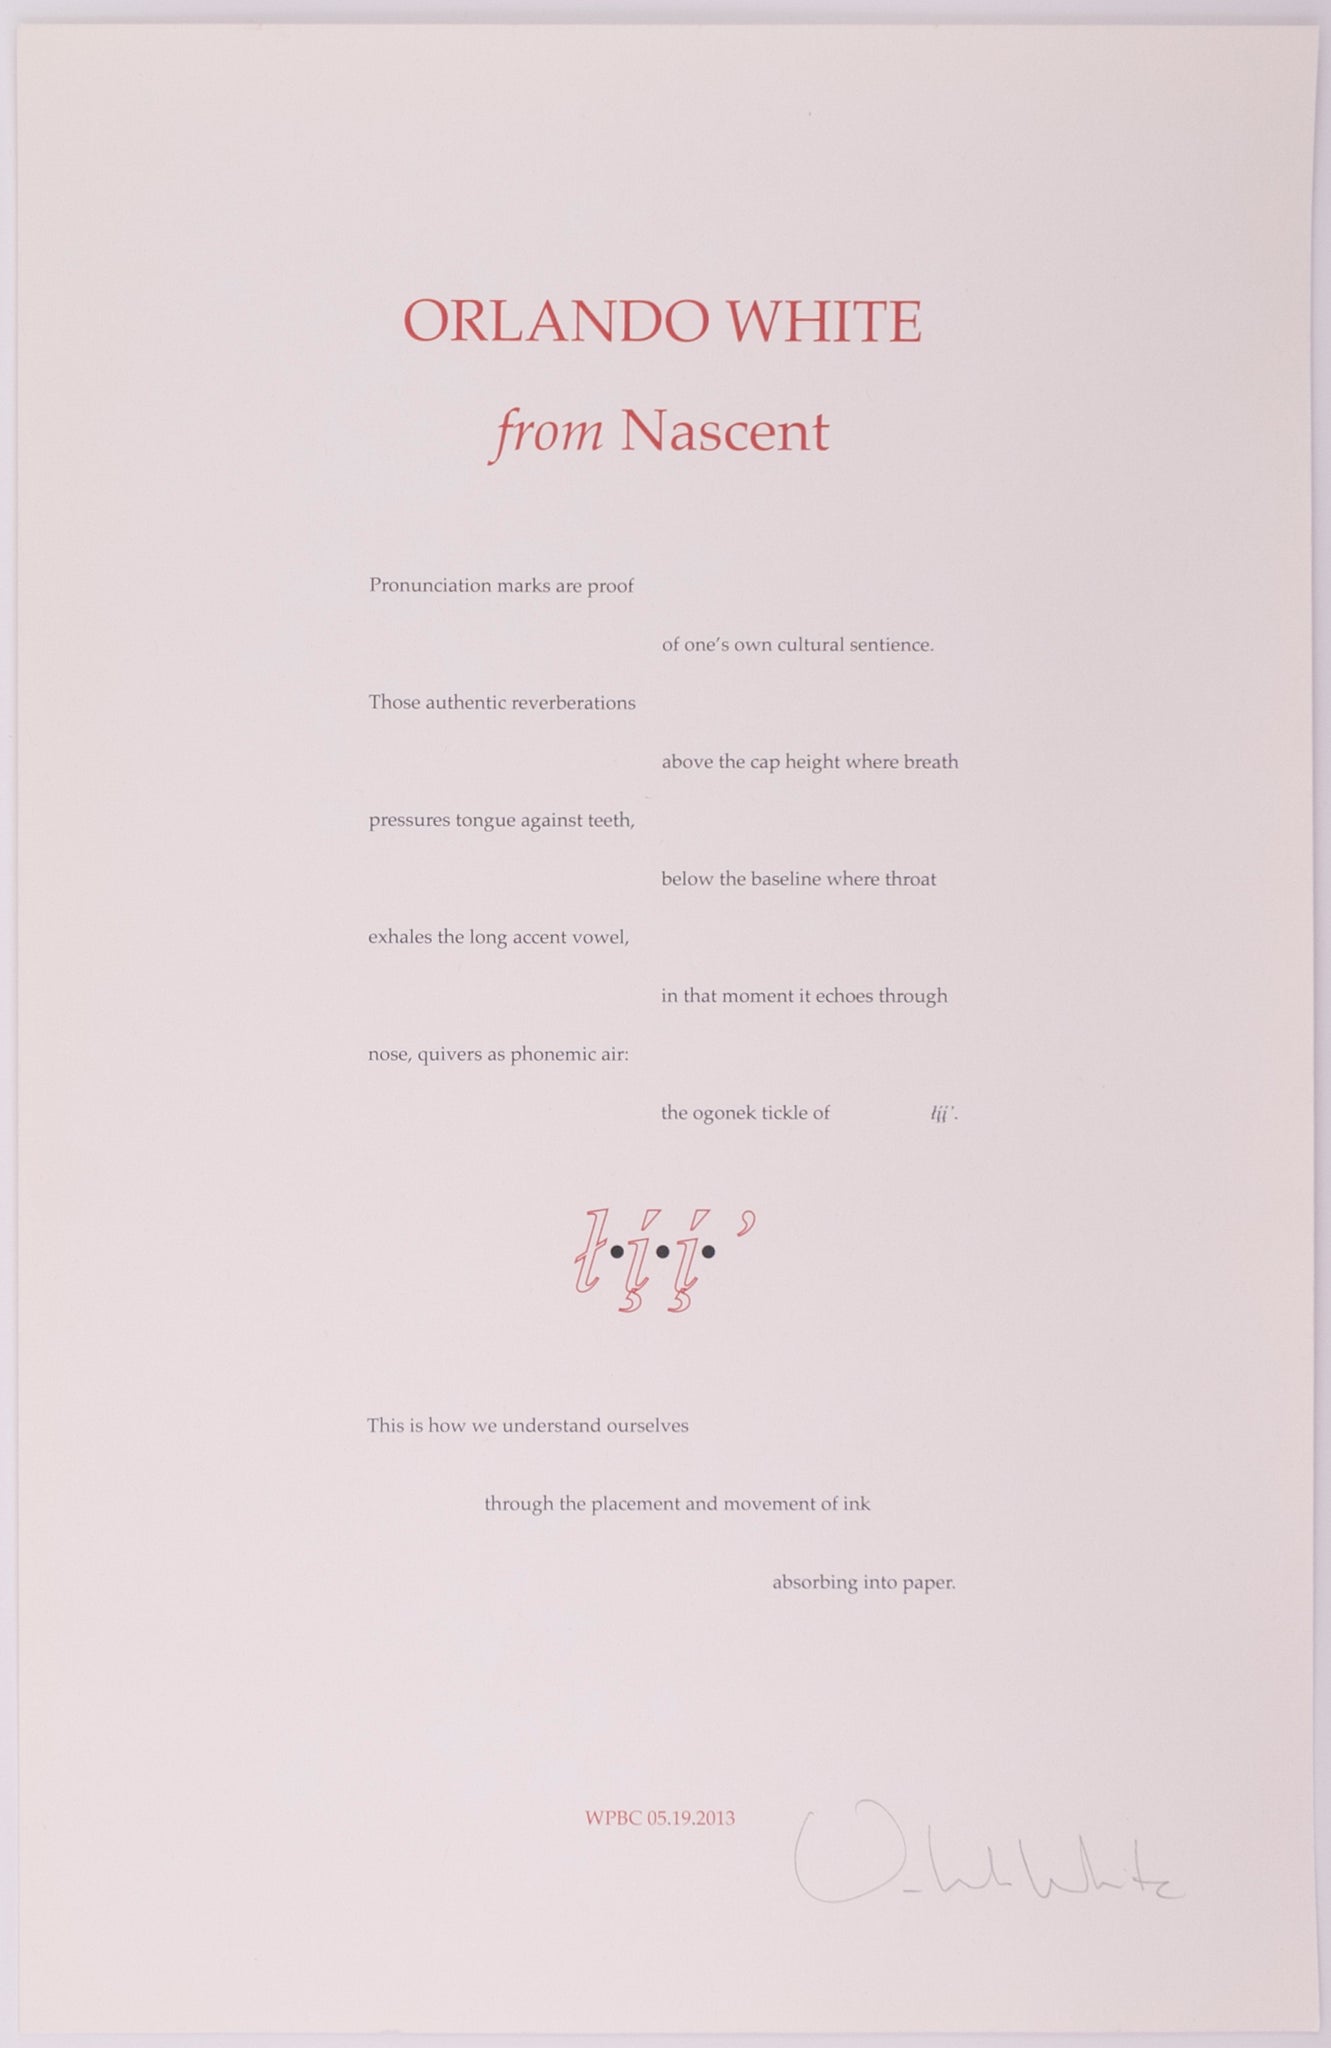 Broadside titled from Nascent by Orlando White. Red and black text on blueish grey paper.